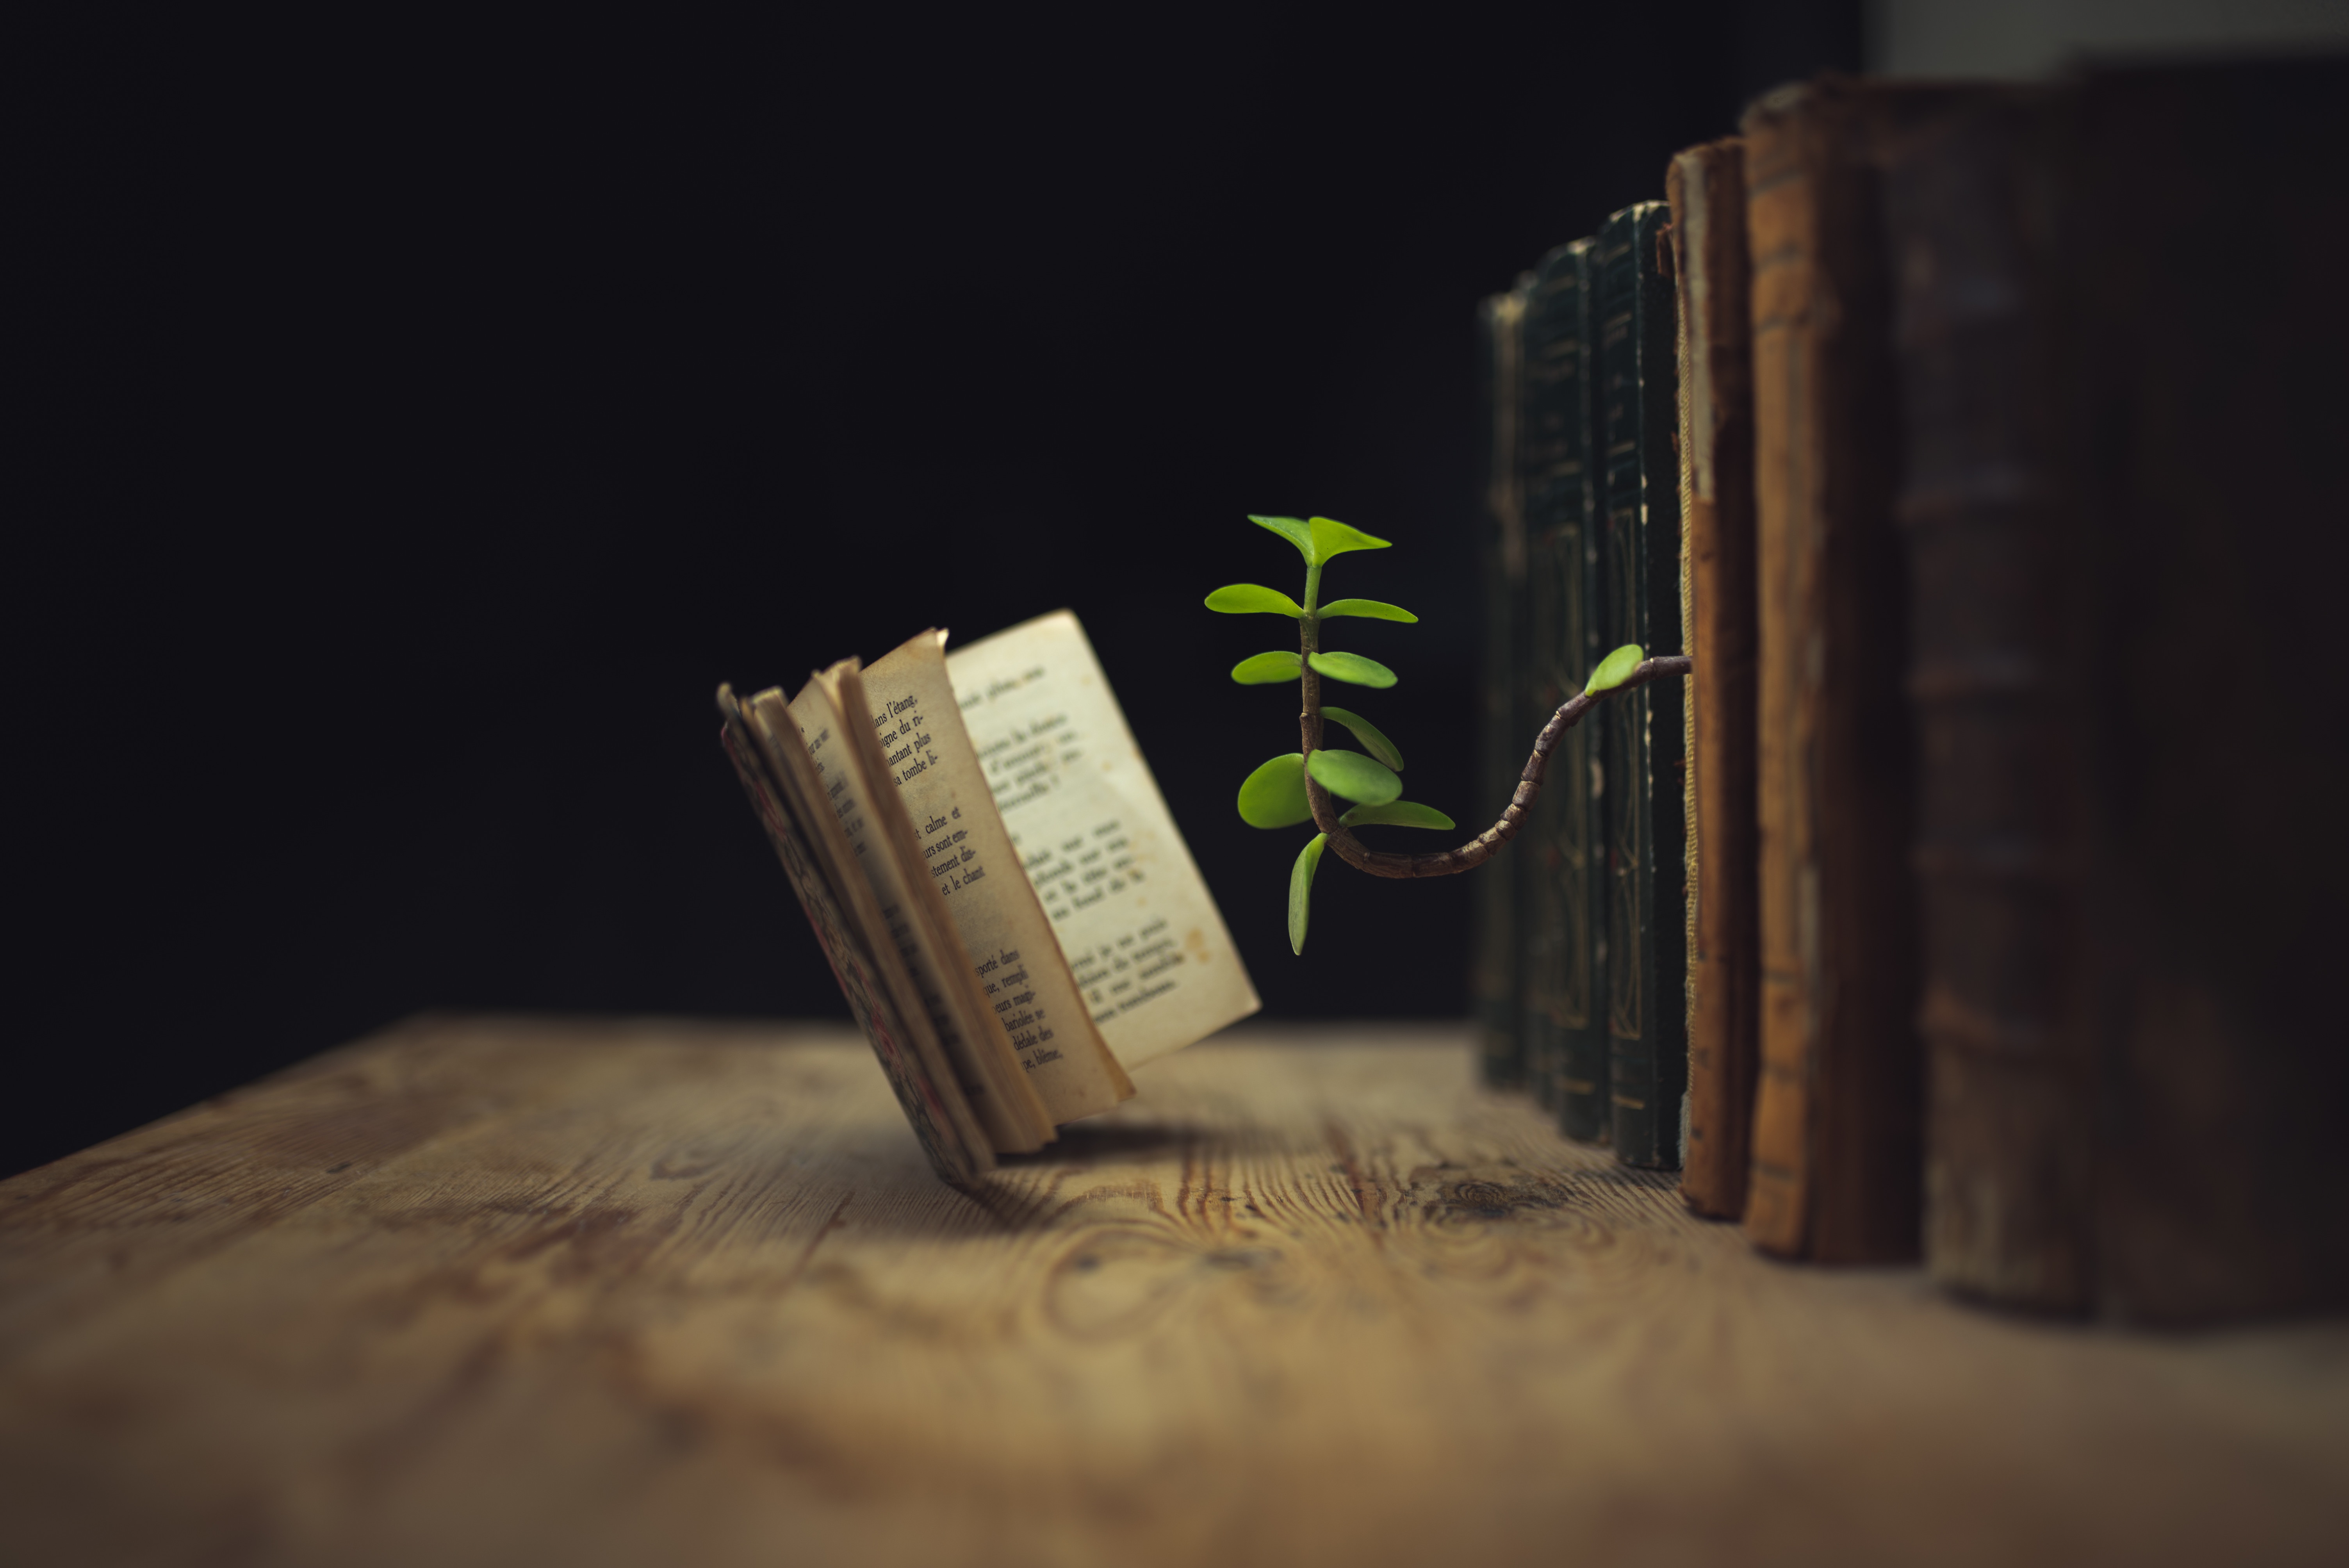 photography, manipulation, book, sprout